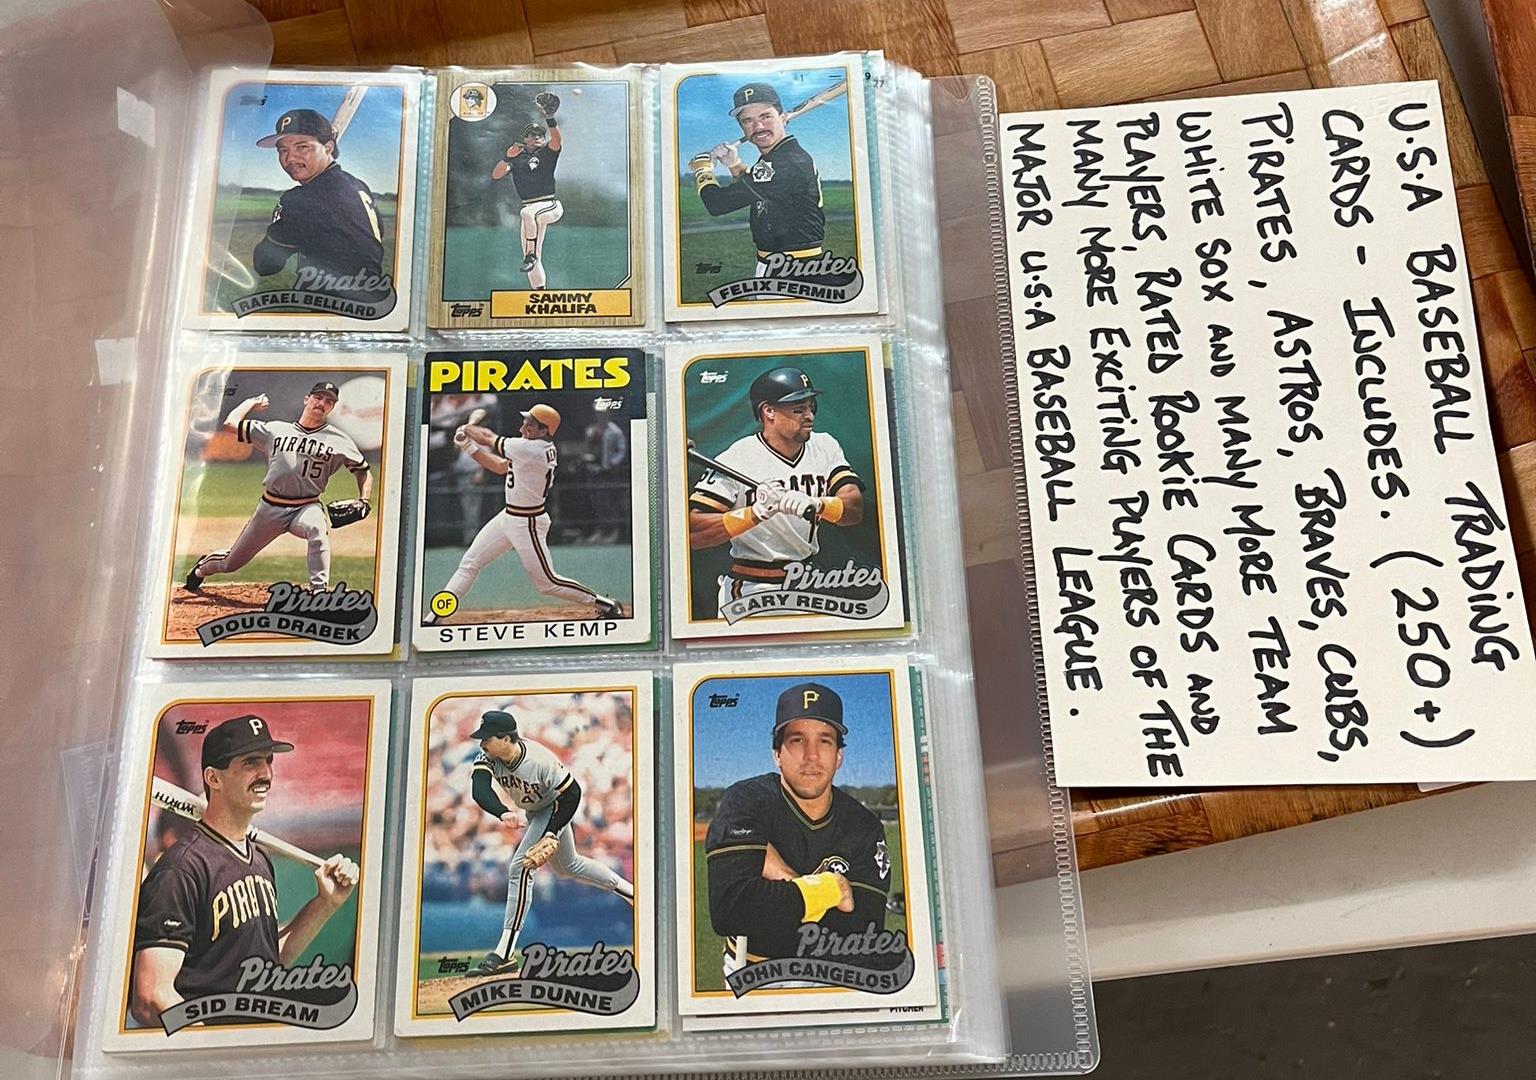 Collection of American Baseball trading cards to include: Pirates, Astros, Braves, Cubs, White Sox